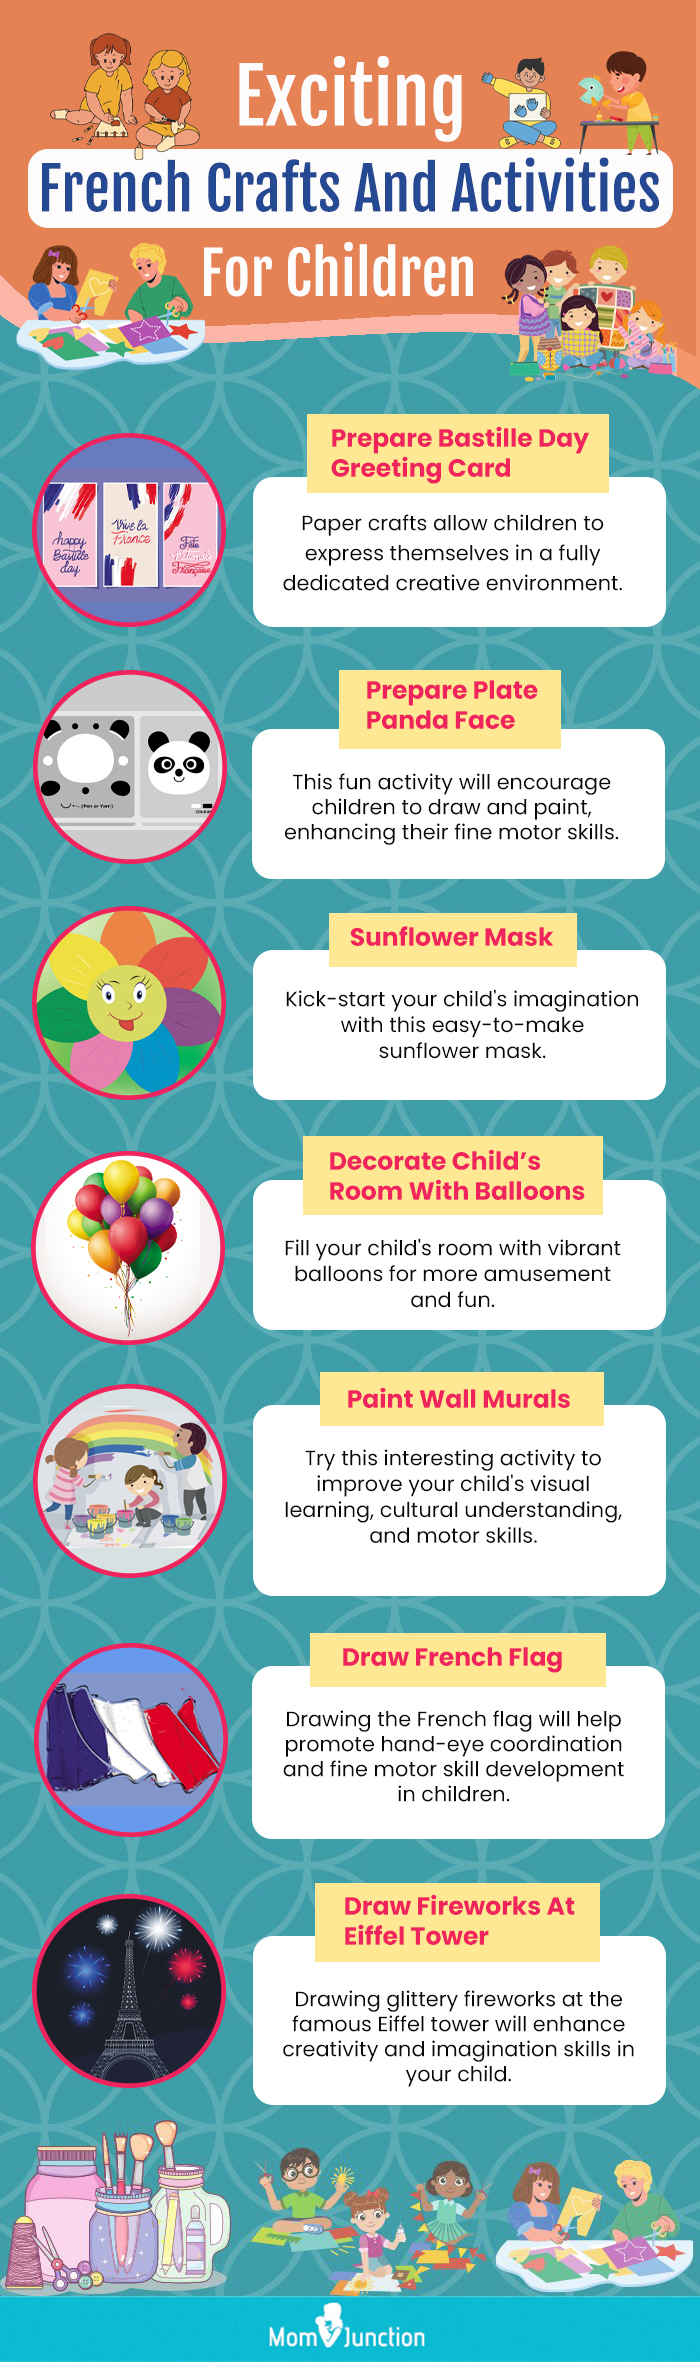 exciting french crafts and activities for children [infographic]